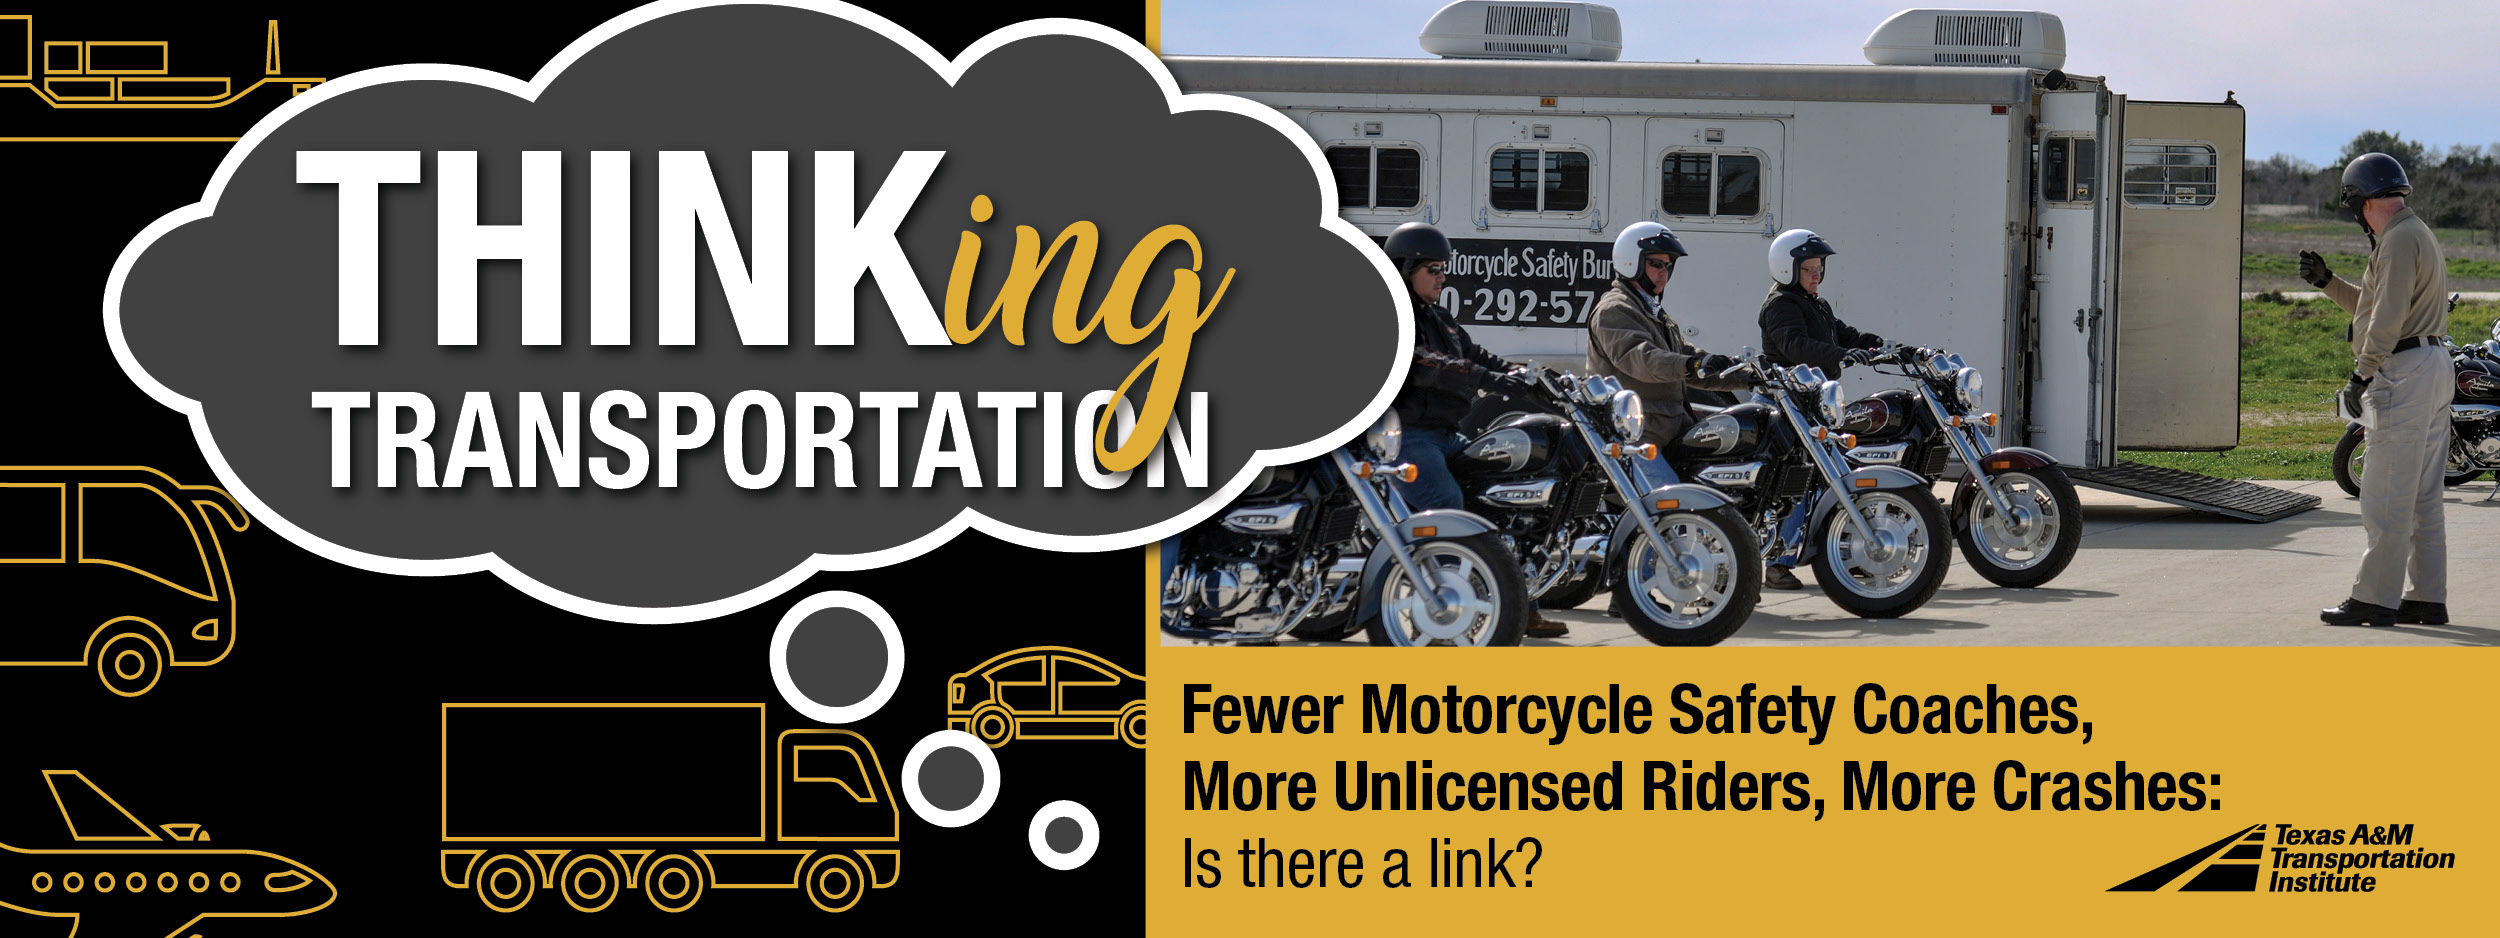 Thinking Transportation (podcast). Fewer Motorcycle Safety Coaches, More Unlicensed Riders, More Crashes: Is there a link?